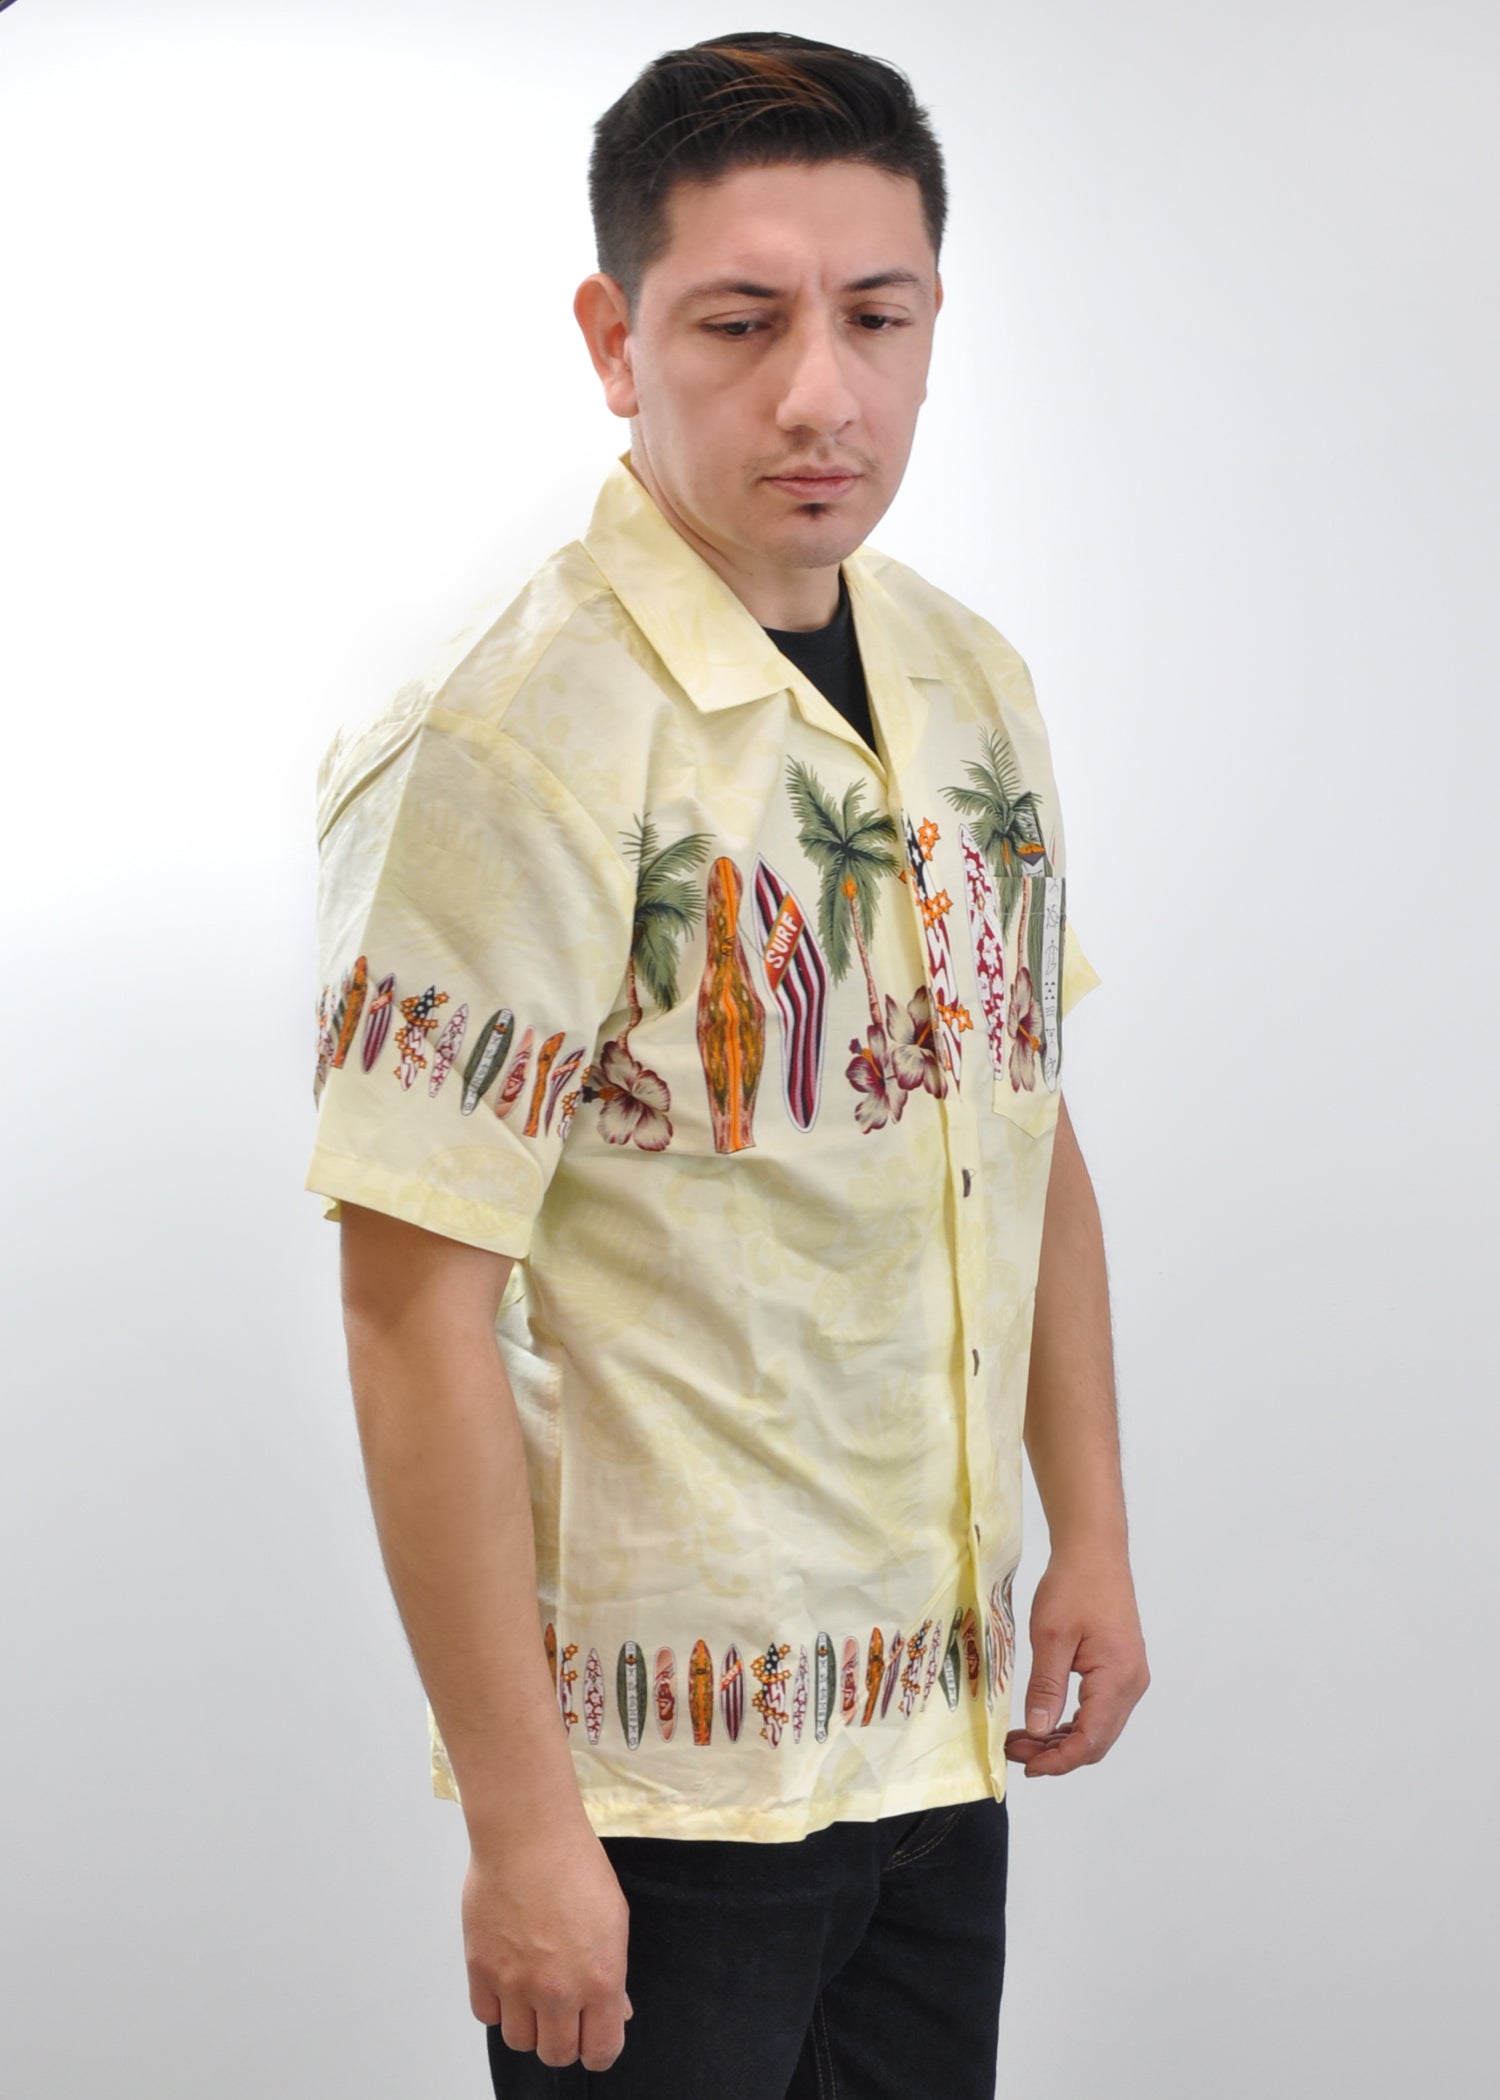 Model wearing High Surf Men's Hawaiian Shirt depicting Palm Trees, Cars and Surfboards in Yellow. Front View.